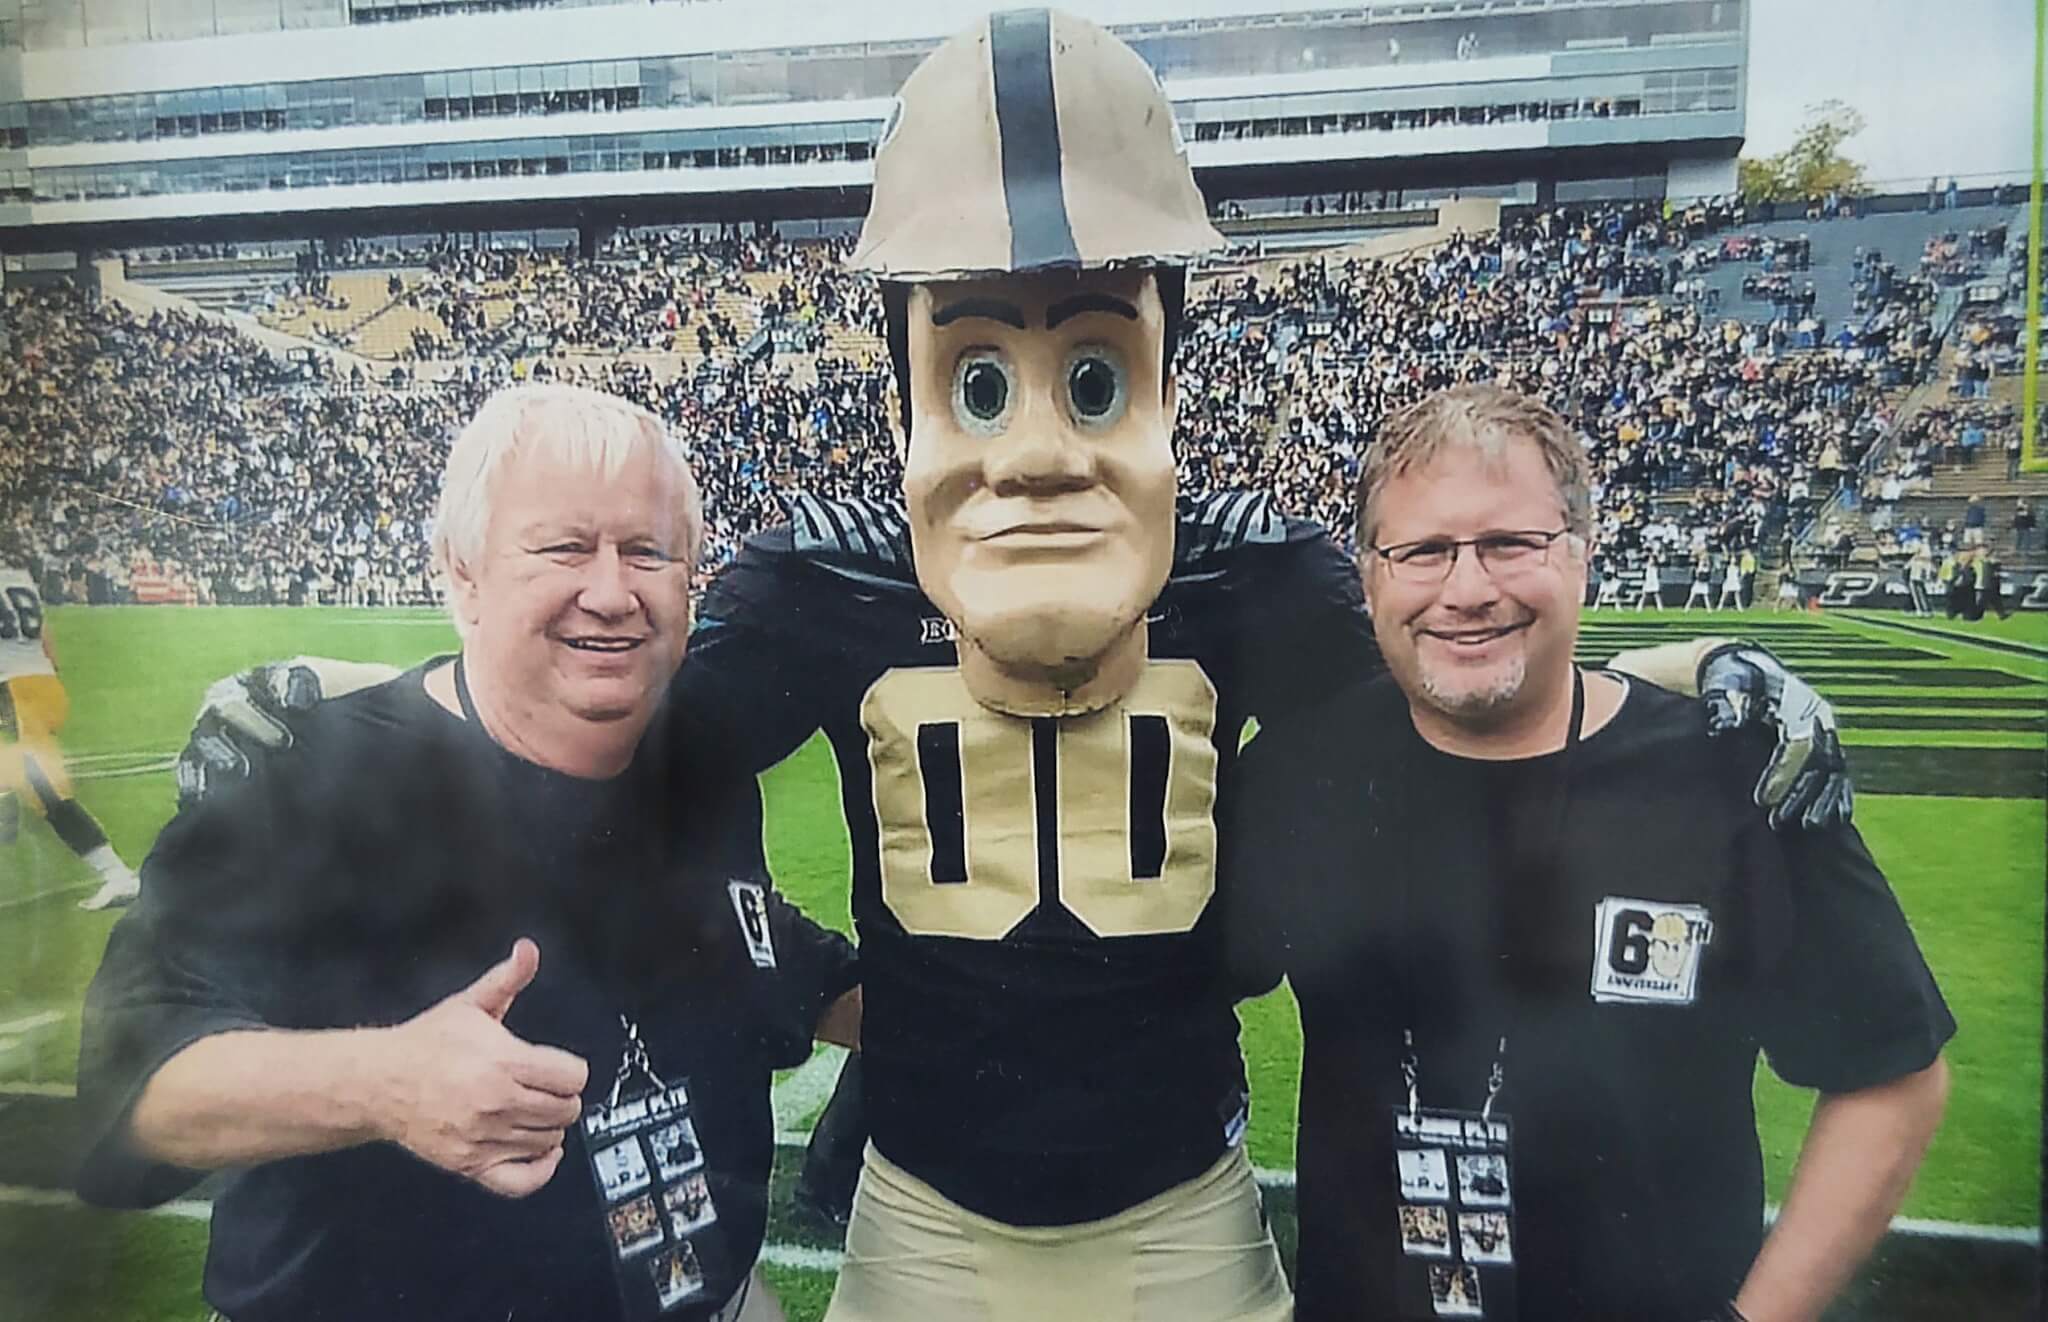 Father and son Purdue Pete in front of field